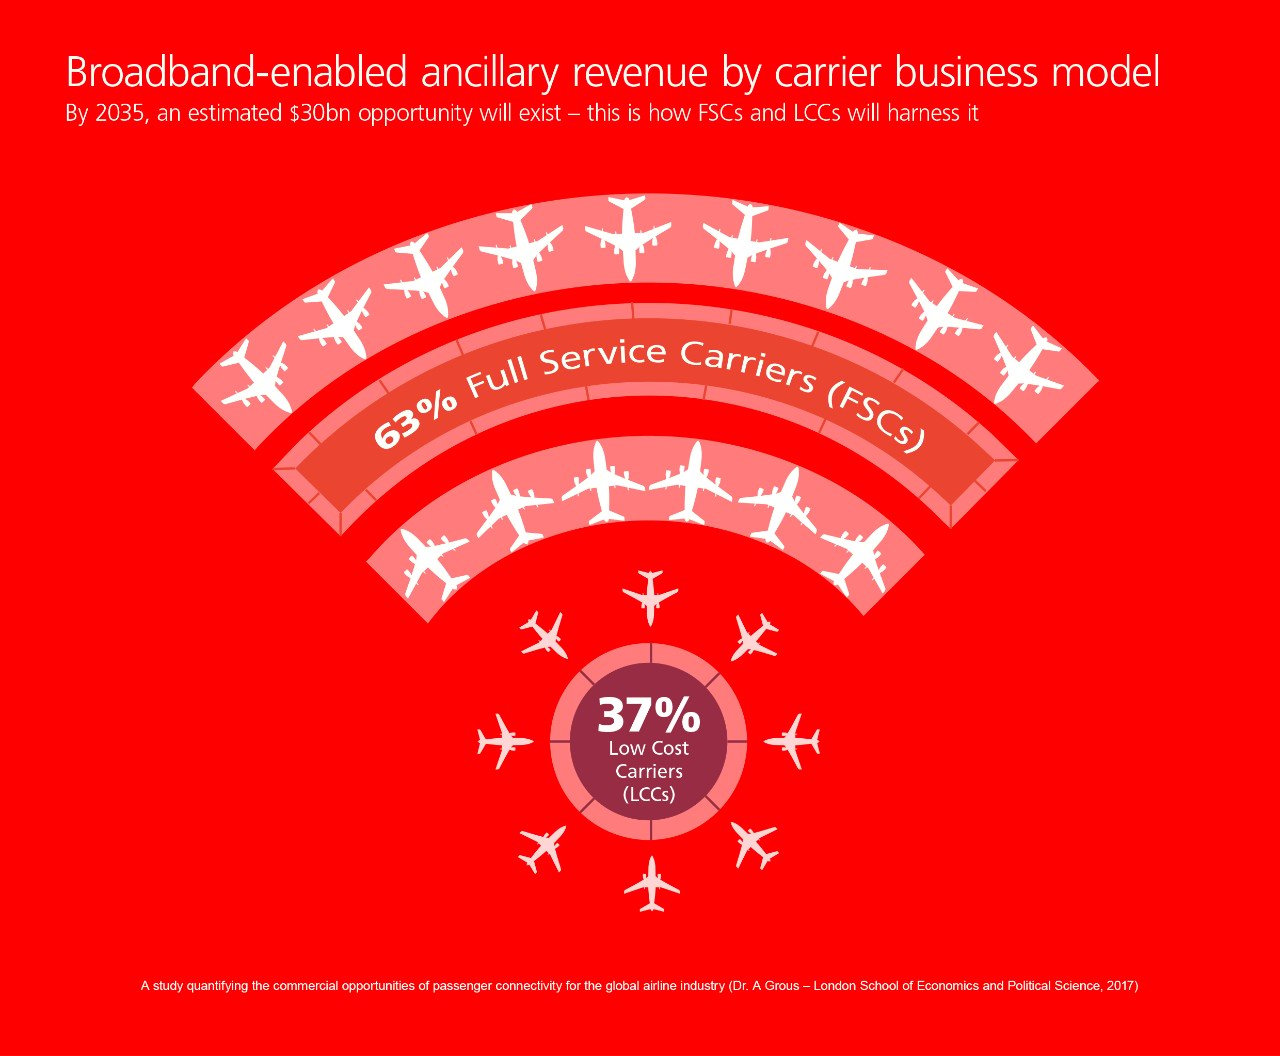 Infographic showing the revenue split between Full Service and Low-Cost Carriers